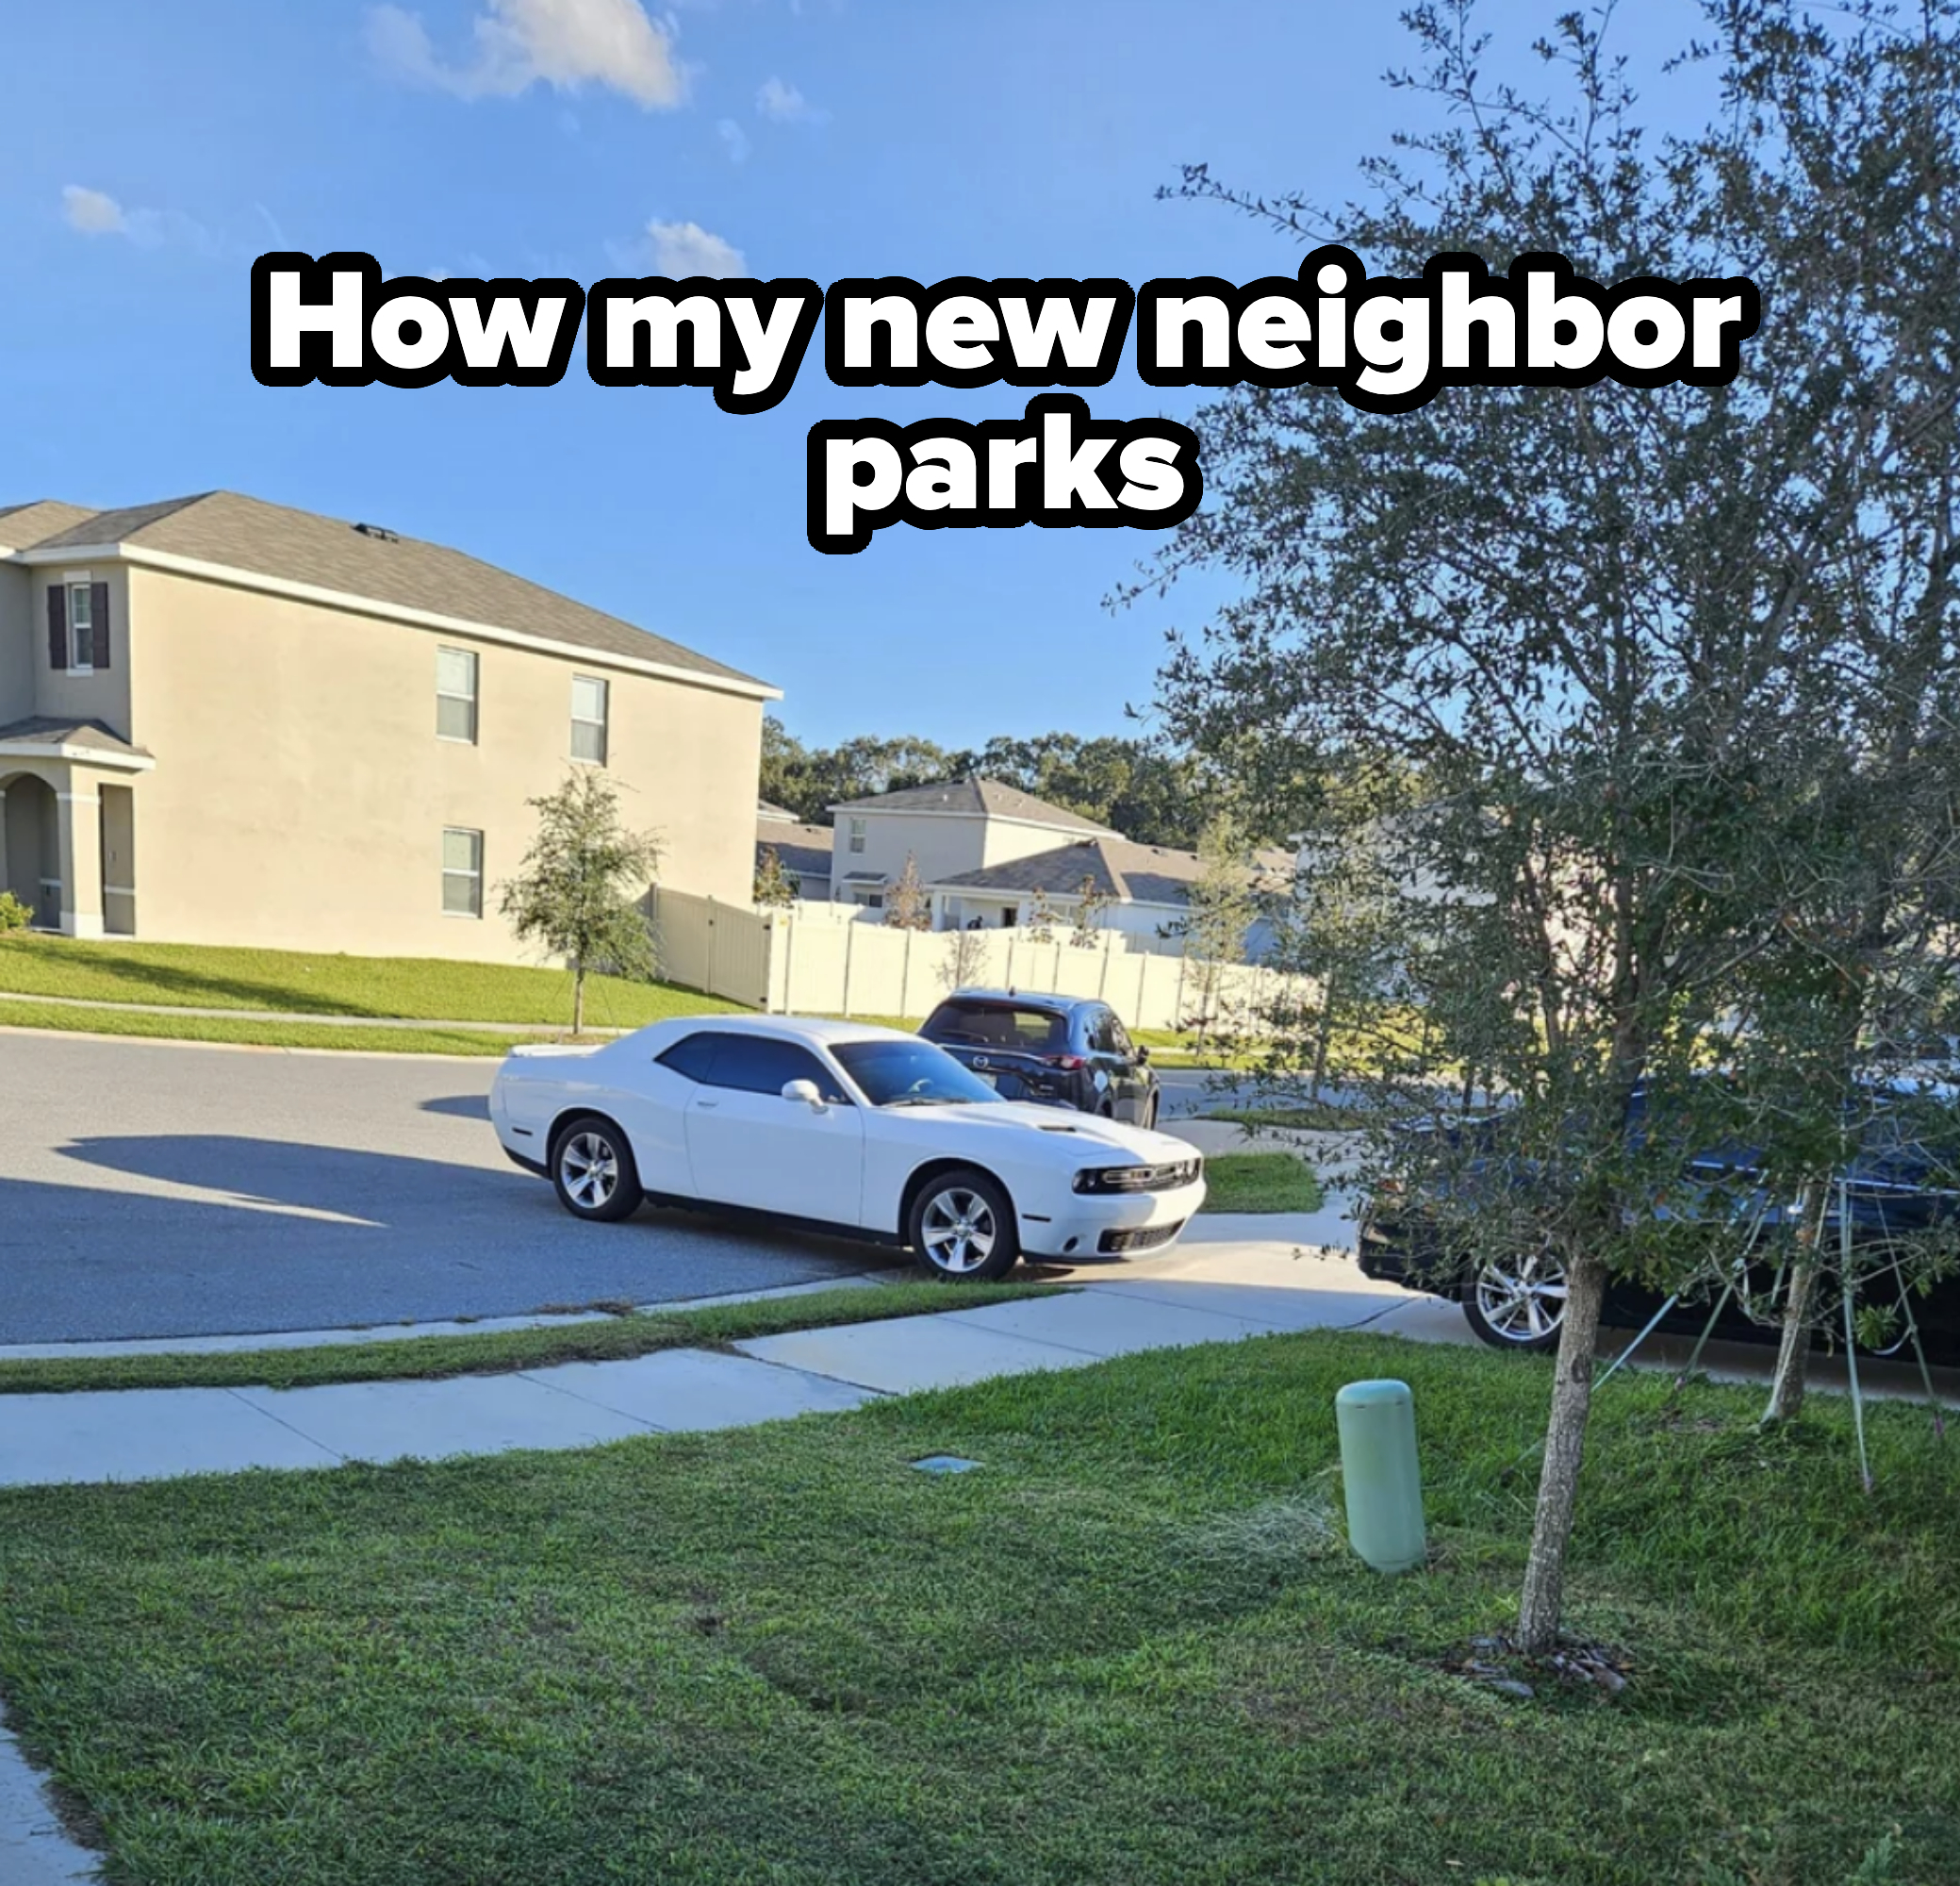 &quot;How my new neighbor parks&quot; with car mostly on the street and sidewalk